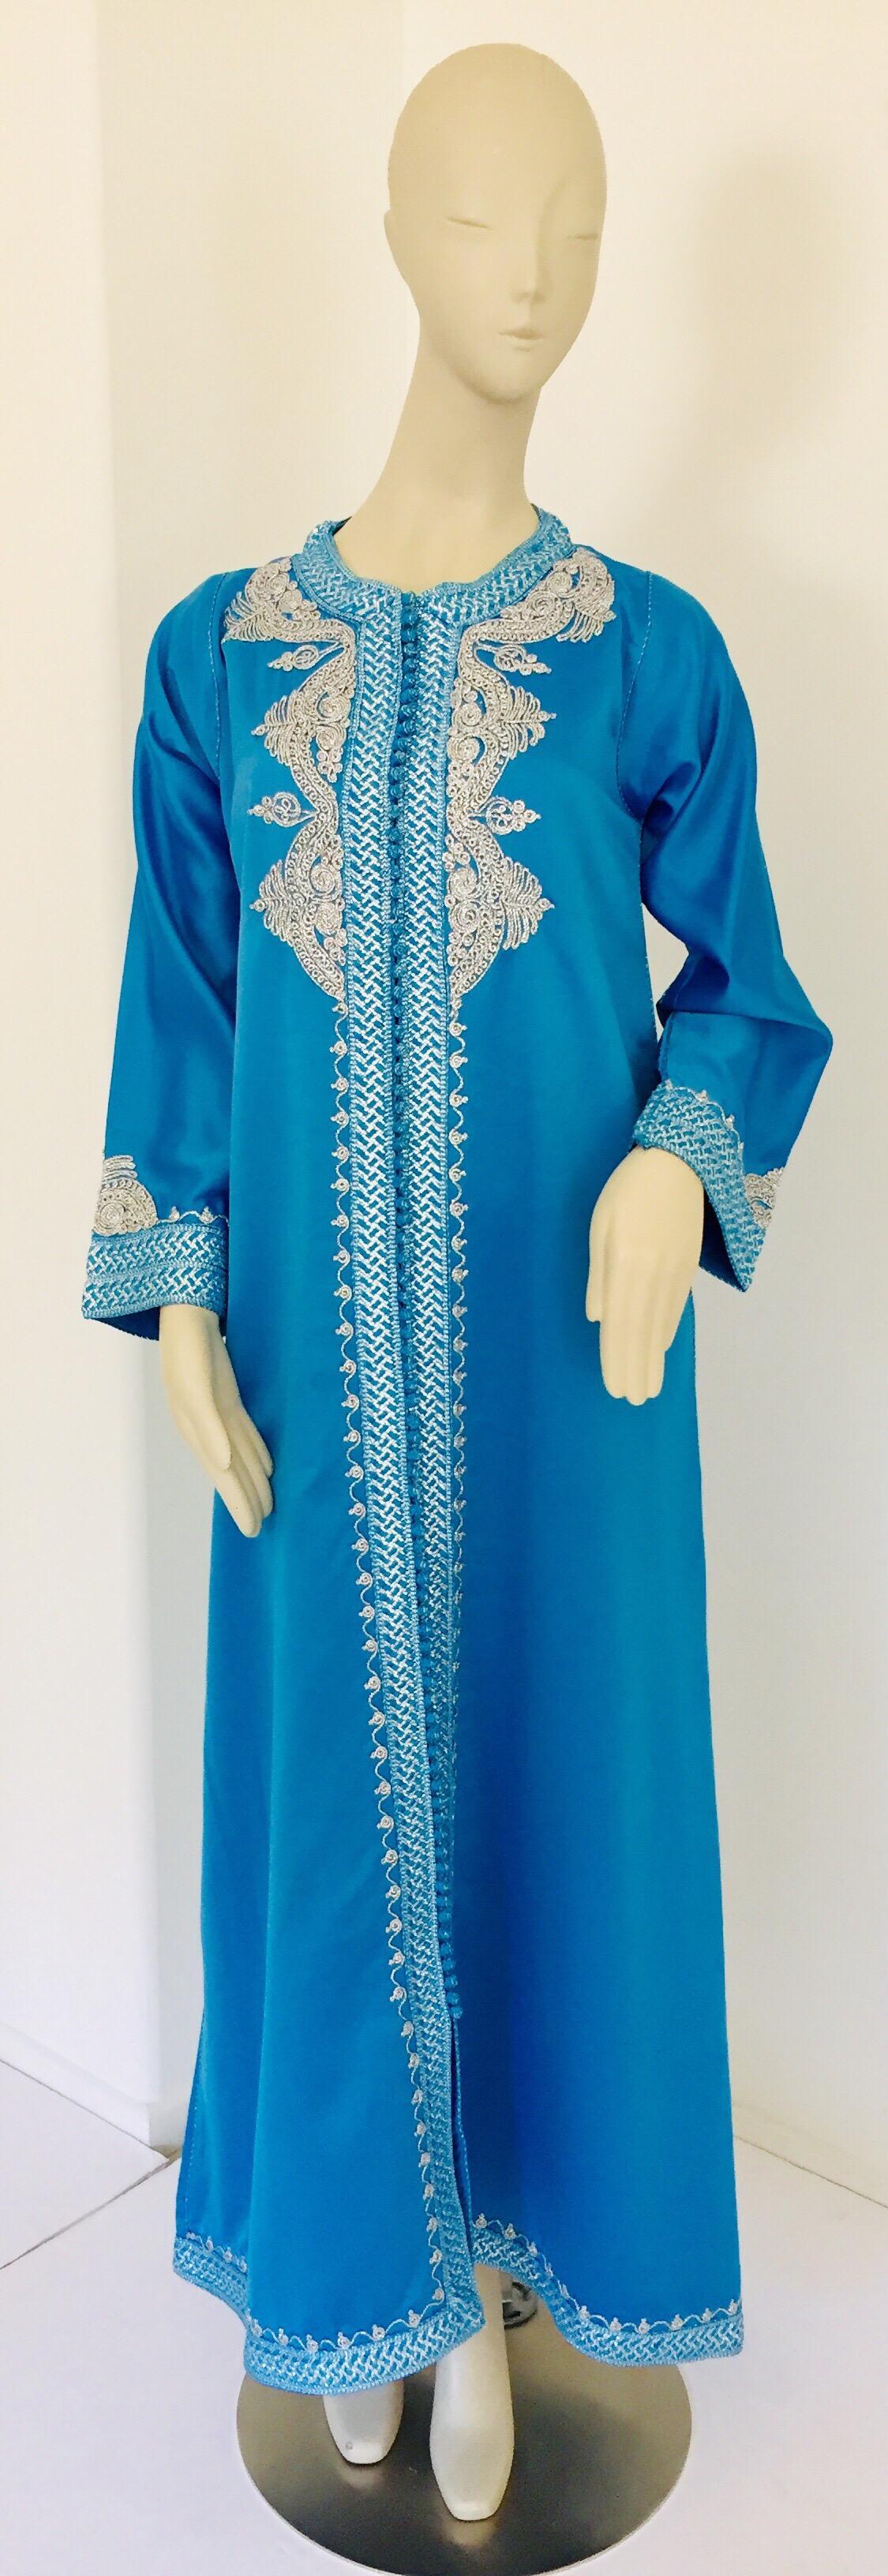 Elegant Moroccan caftan in turquoise blue and silver metallic embroidered trim and front.
This long maxi dress kaftan is embroidered and embellished entirely by hand.
It’s crafted in Morocco and tailored for a relaxed fit.
One of a kind evening